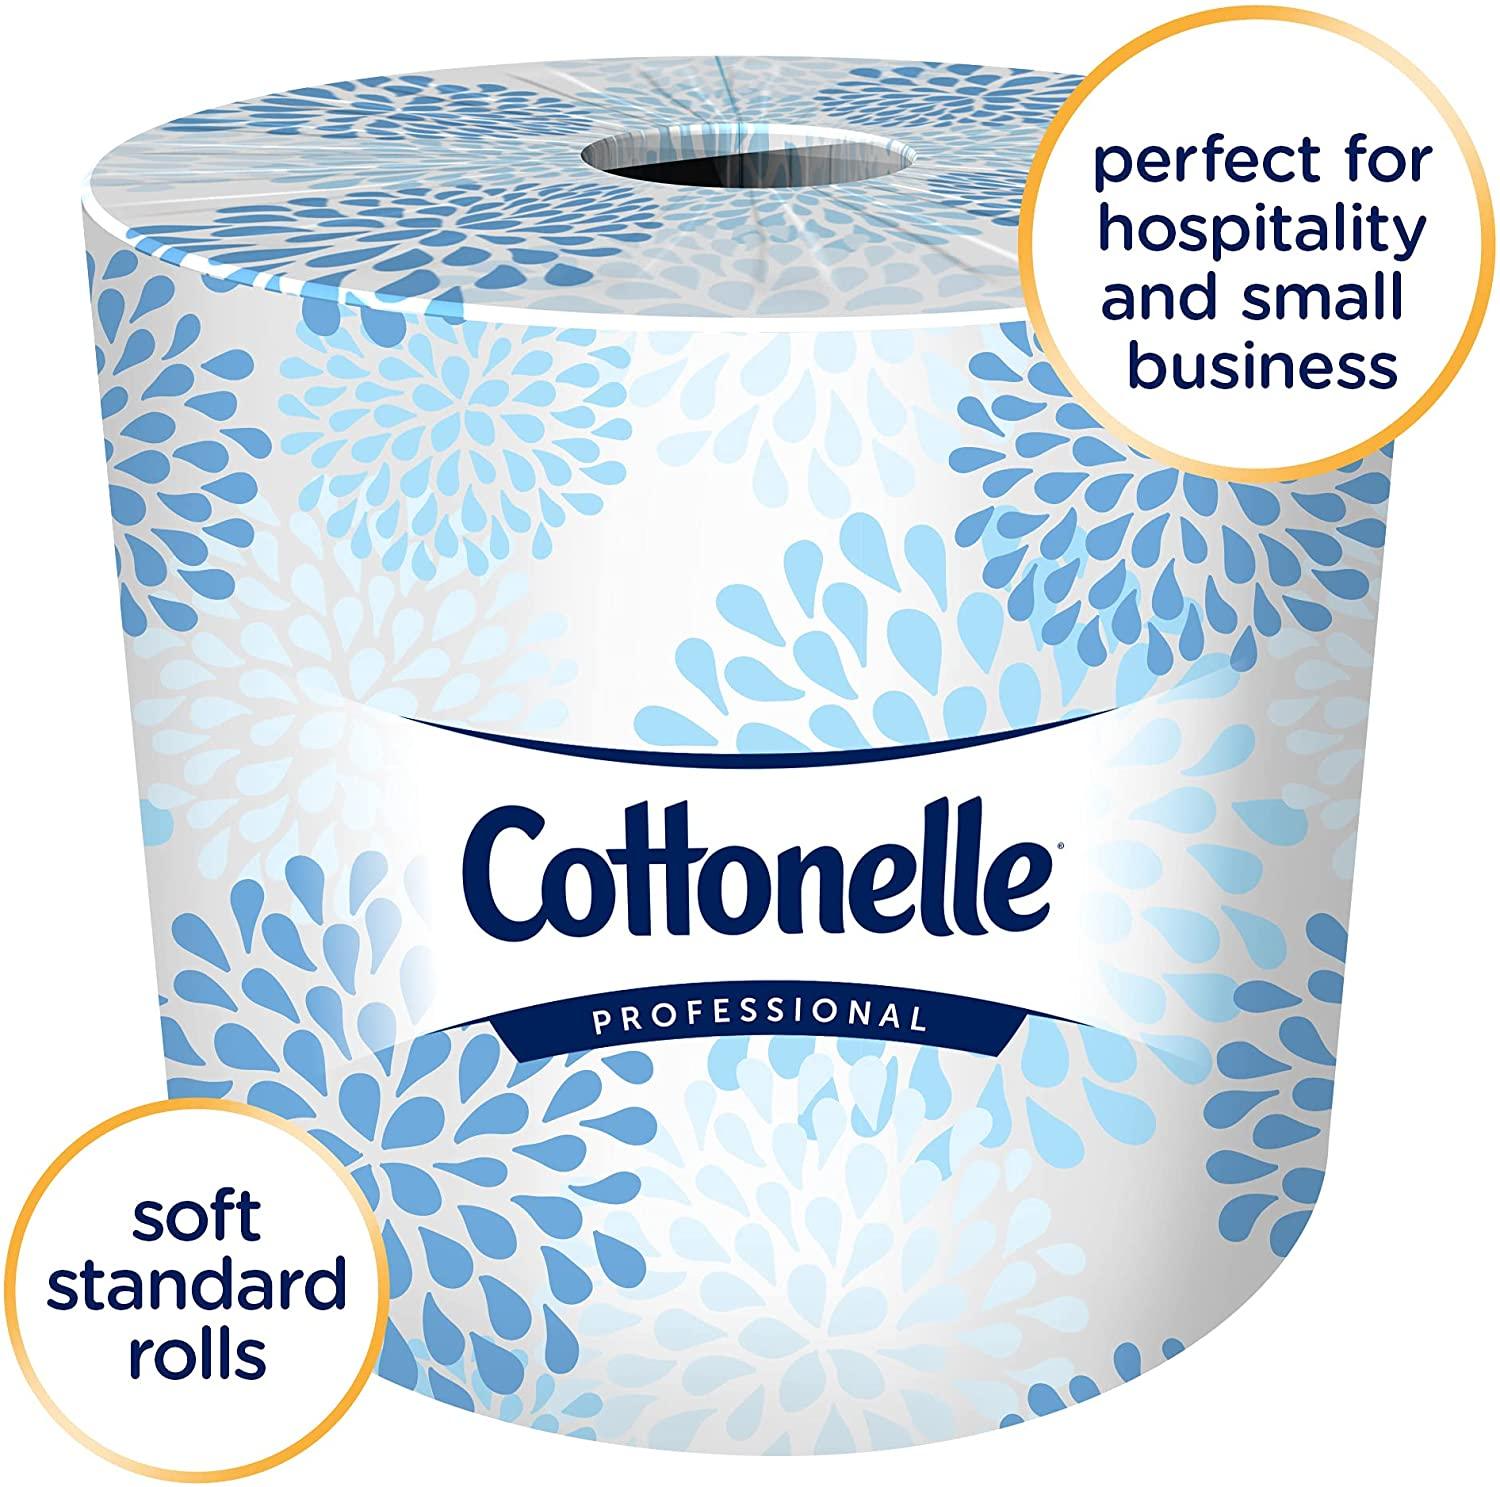 Scott Essential Professional Bulk Toilet Paper for Business (04460),  Individually Wrapped Standard Rolls, 2-PLY, White, 80 Rolls / Case, 550  Sheets / Roll